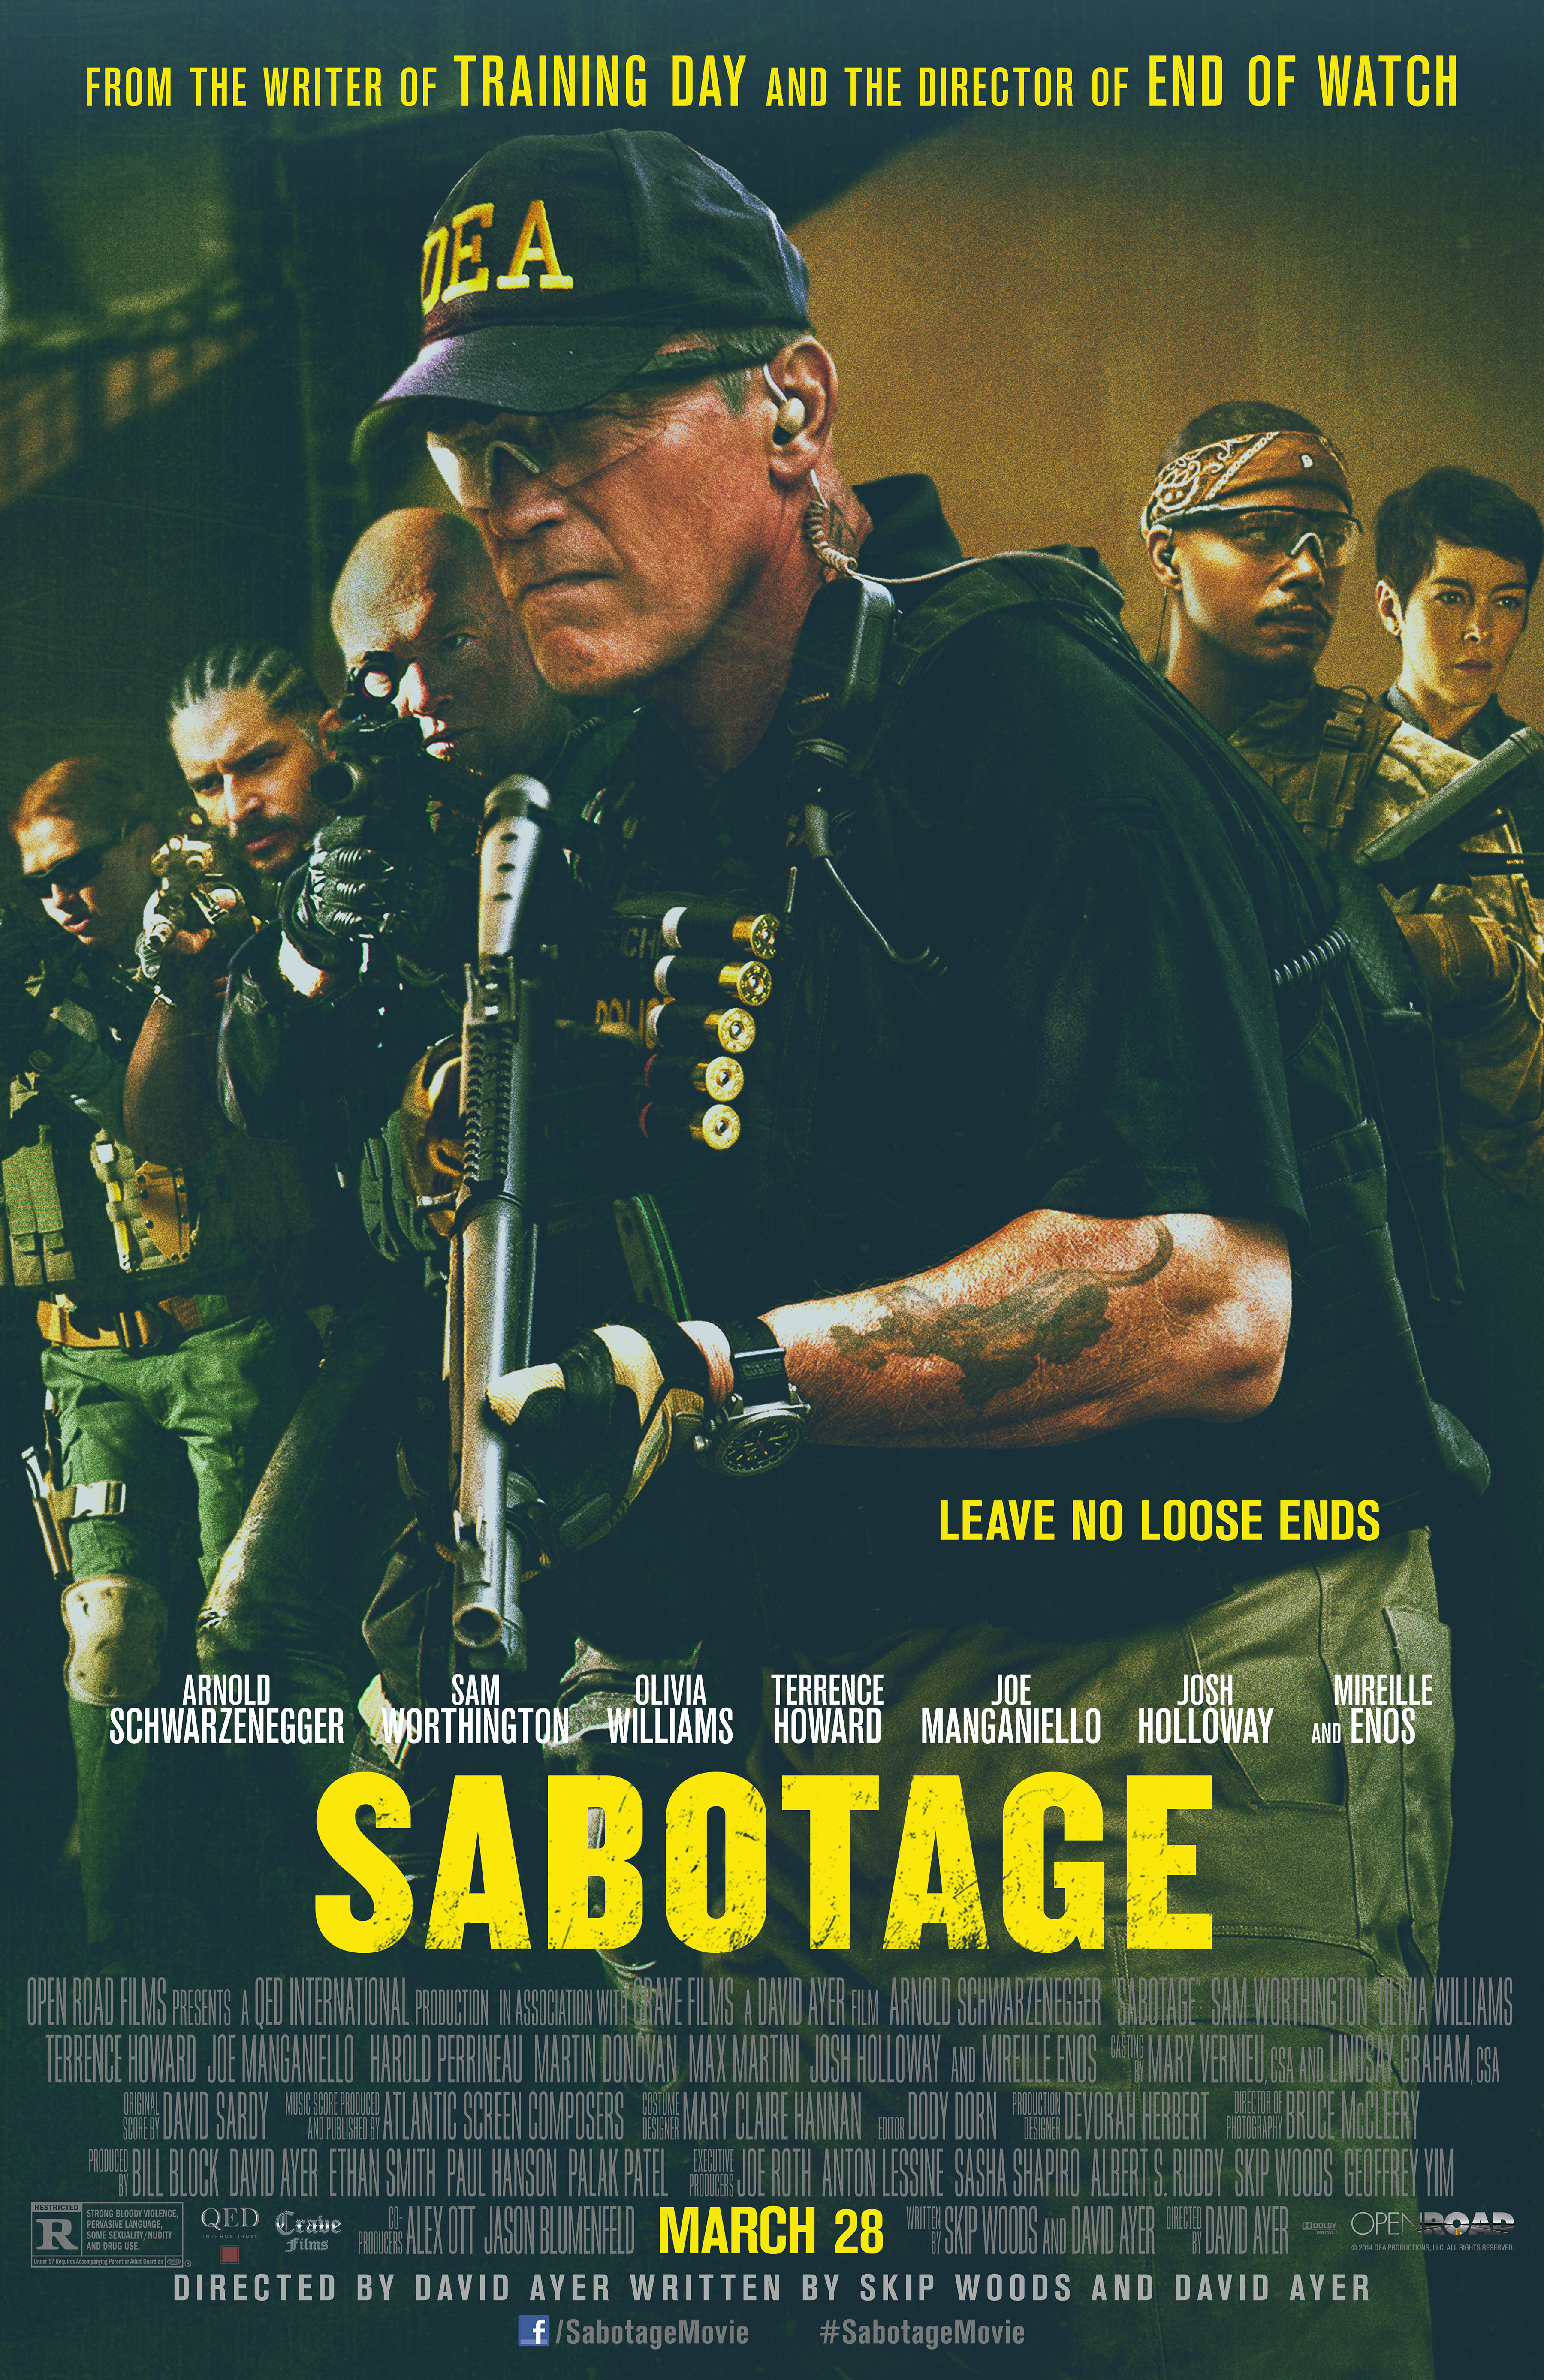 Open Road Presents: Sabotage Tuesday | March 25 7:00 pm  Arnold Schwarzenegger leads an elite